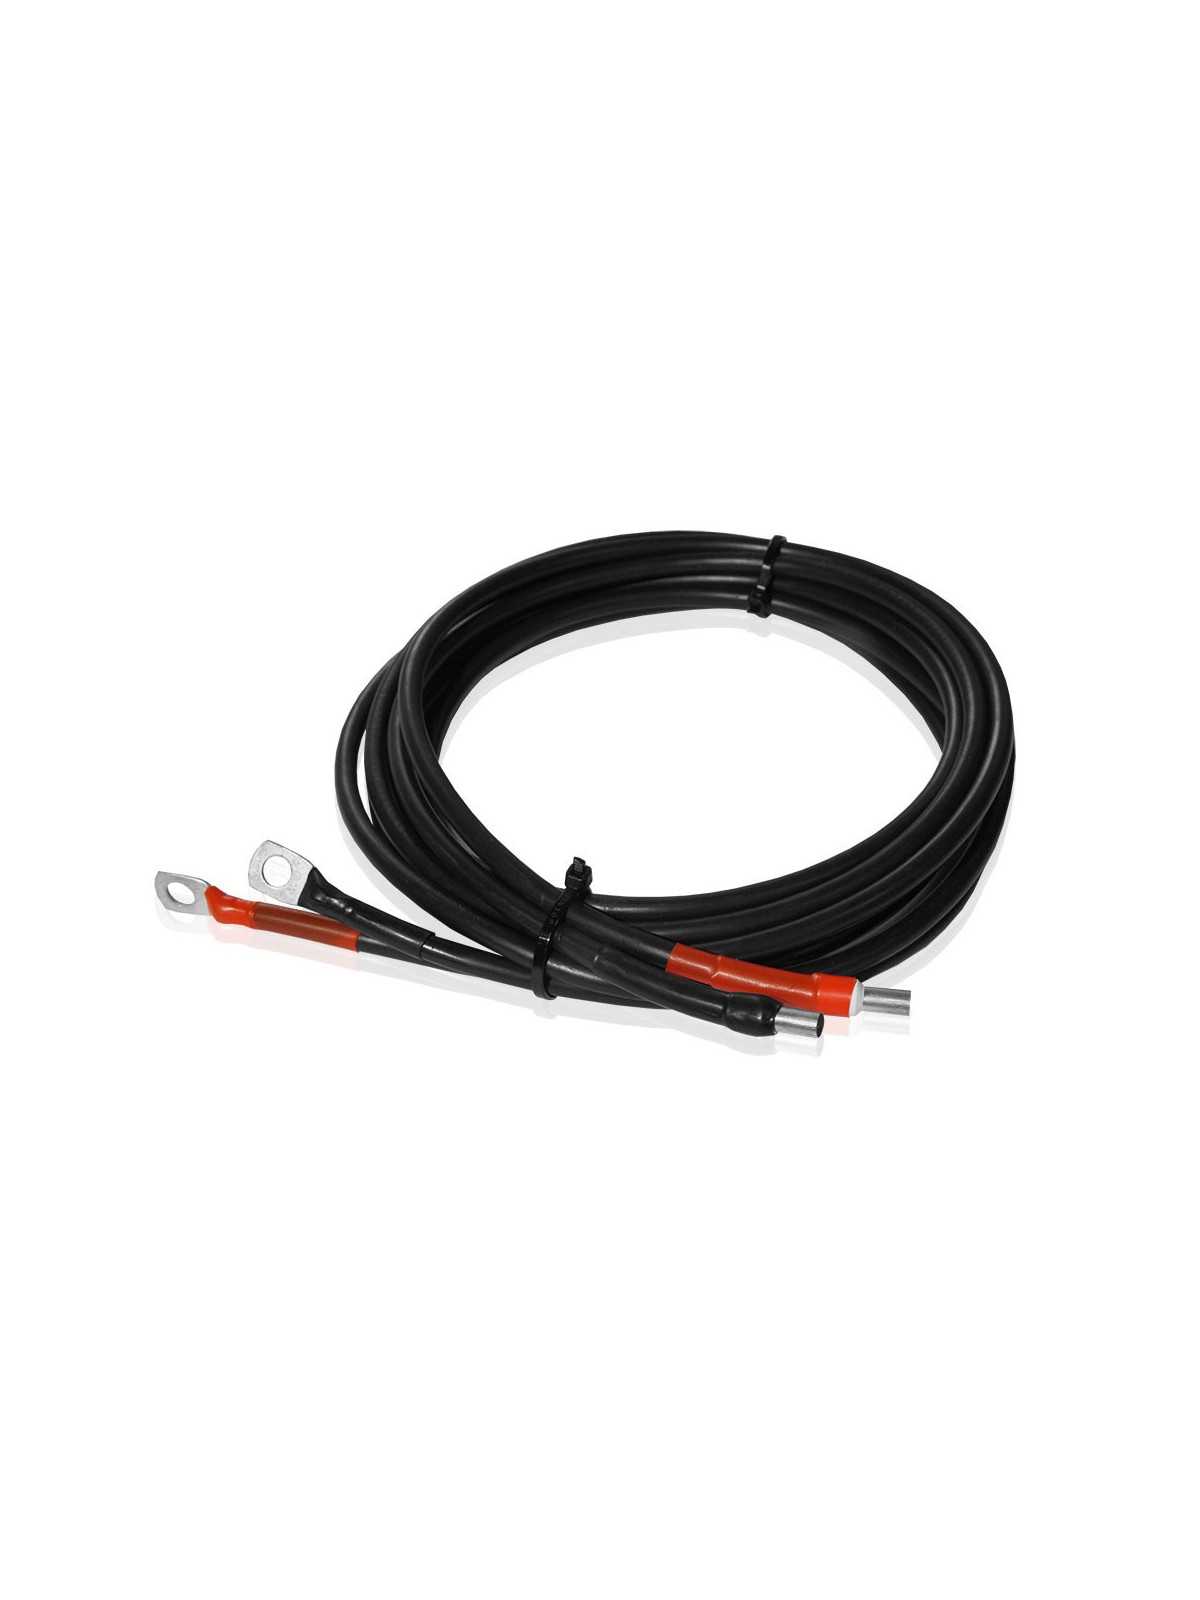 https://www.wattuneed.com/7972-product_zoom/cable-batterie-2x16mm-2m.jpg